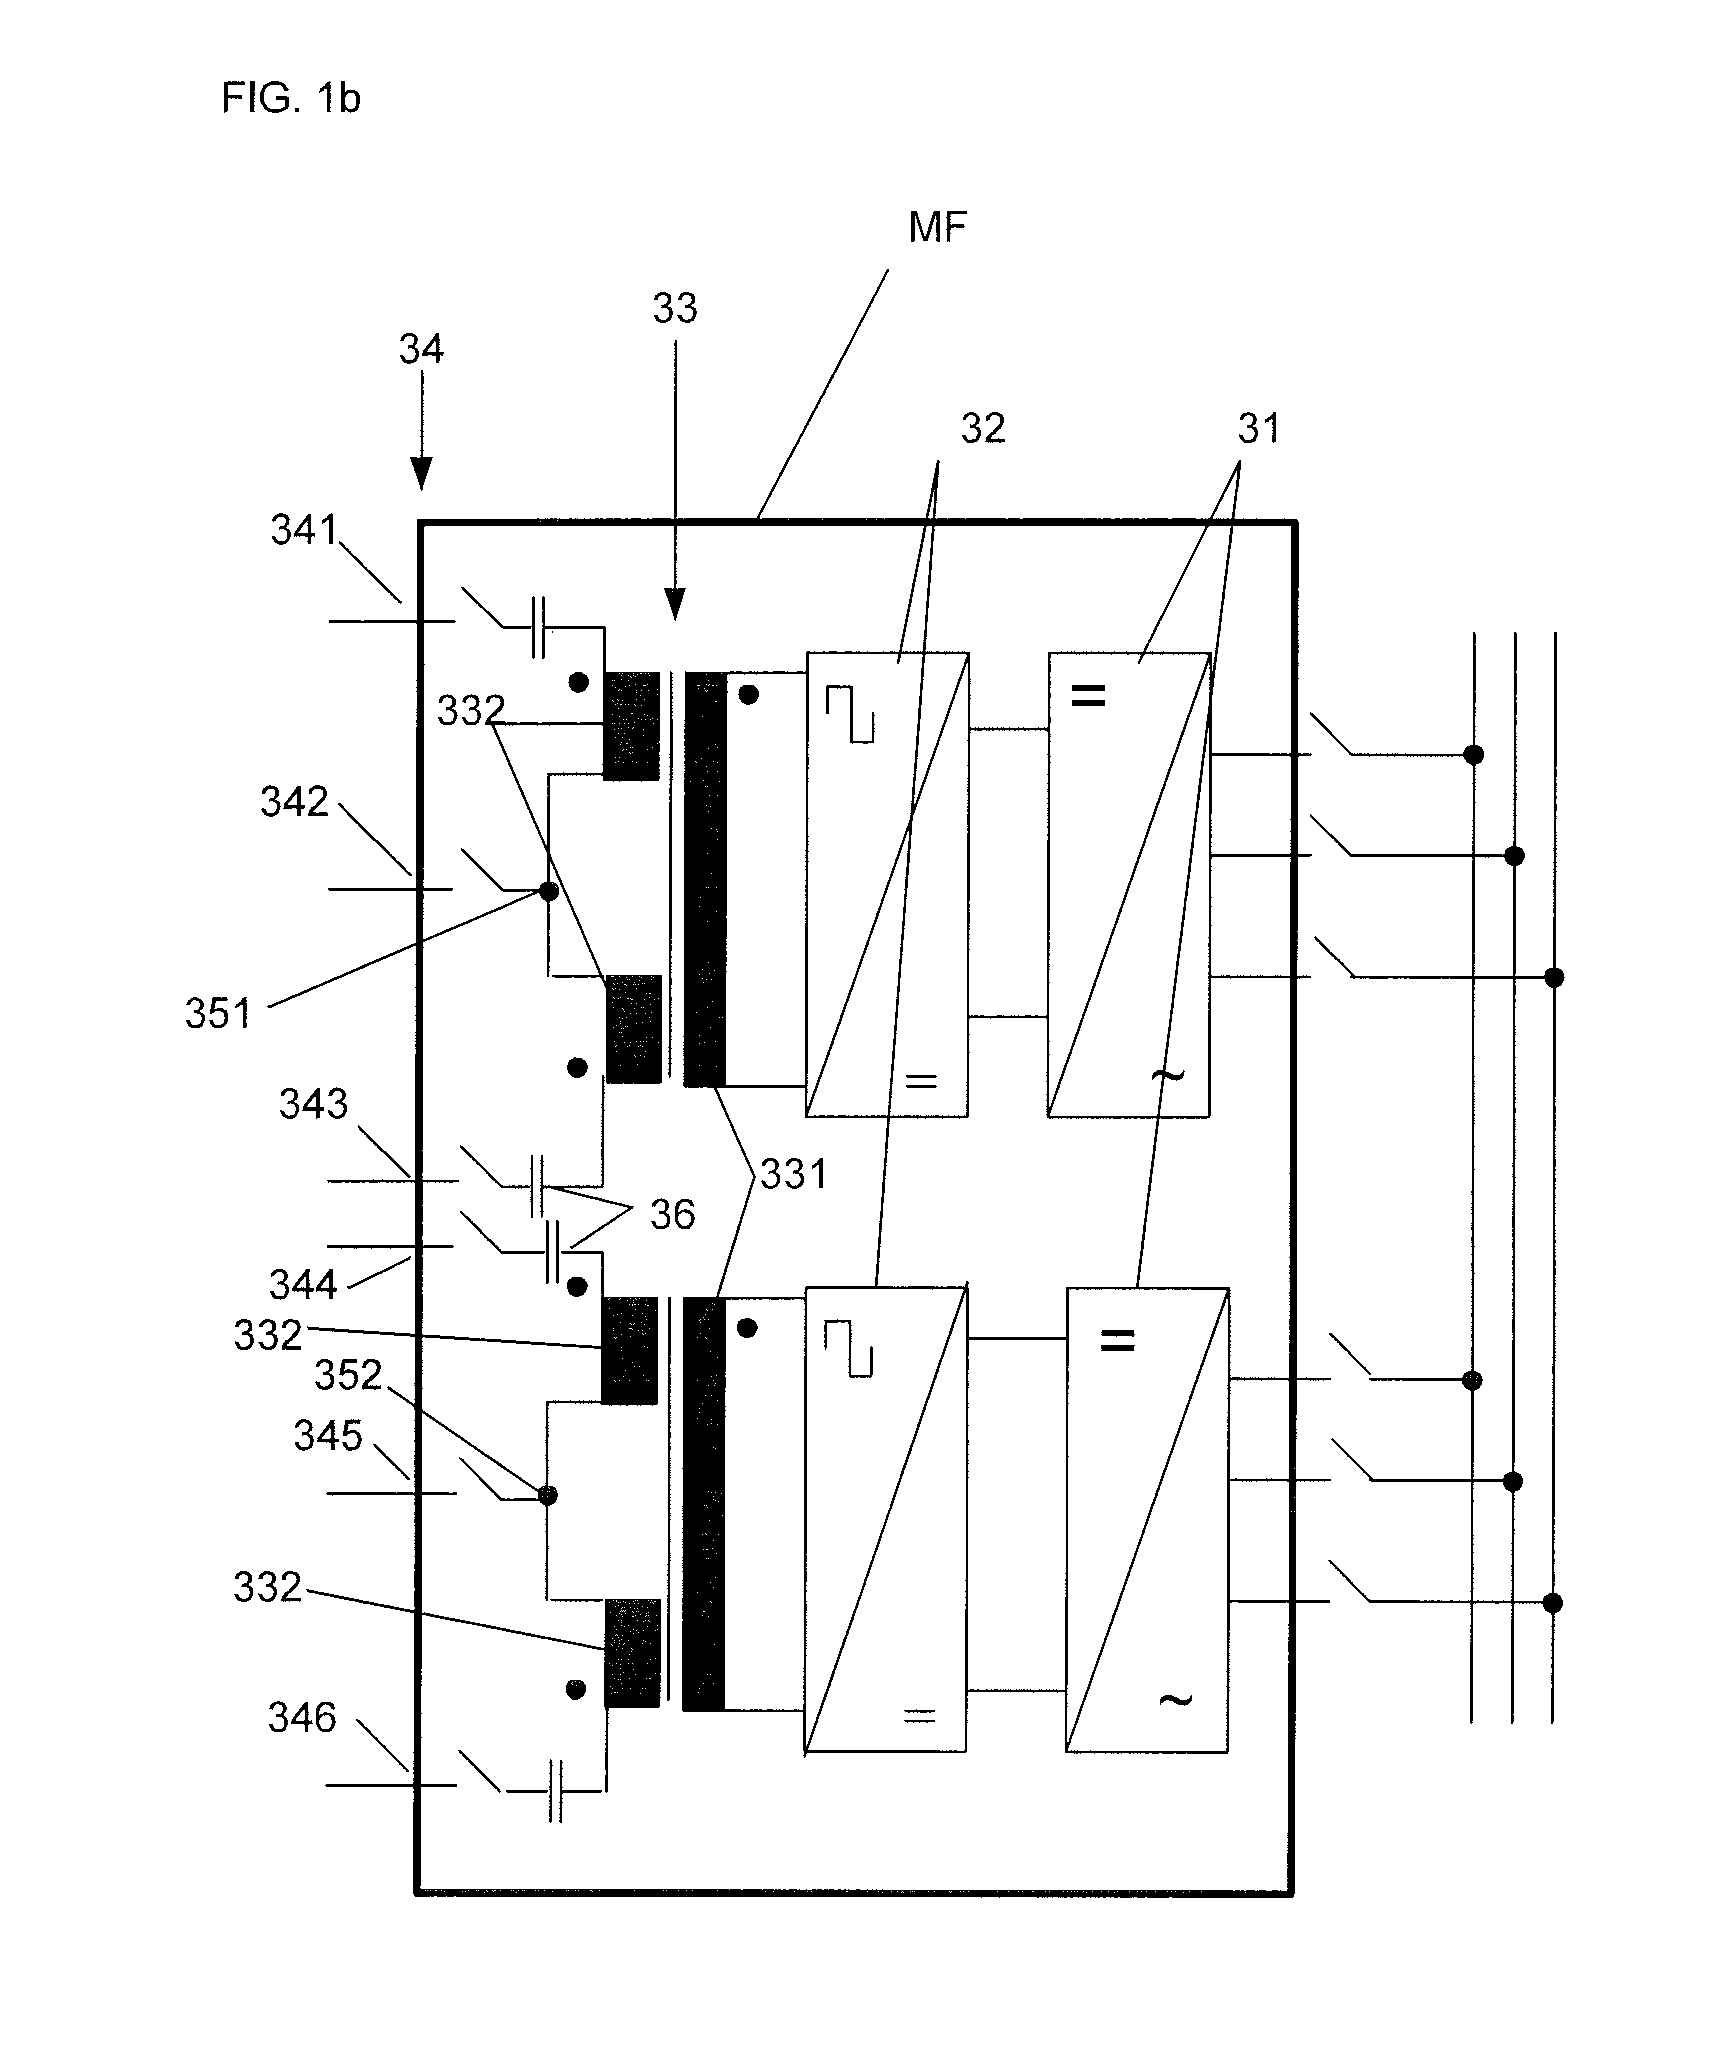 Modular power supply arrangement, in particular for reactors for producing polysilicon